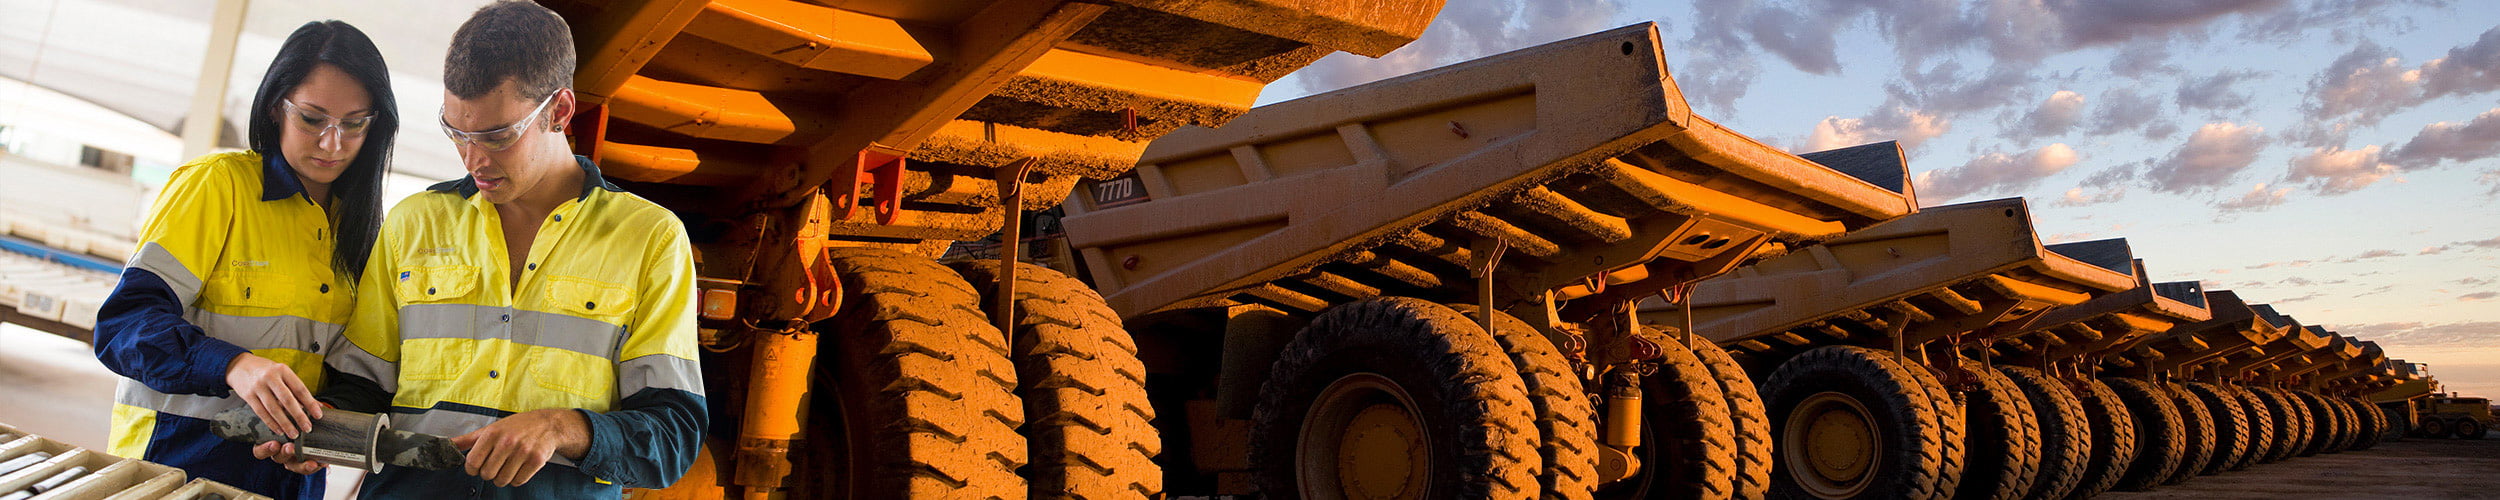 mining industry collage, large dump trucks, labour hire staff in hi vis clothing